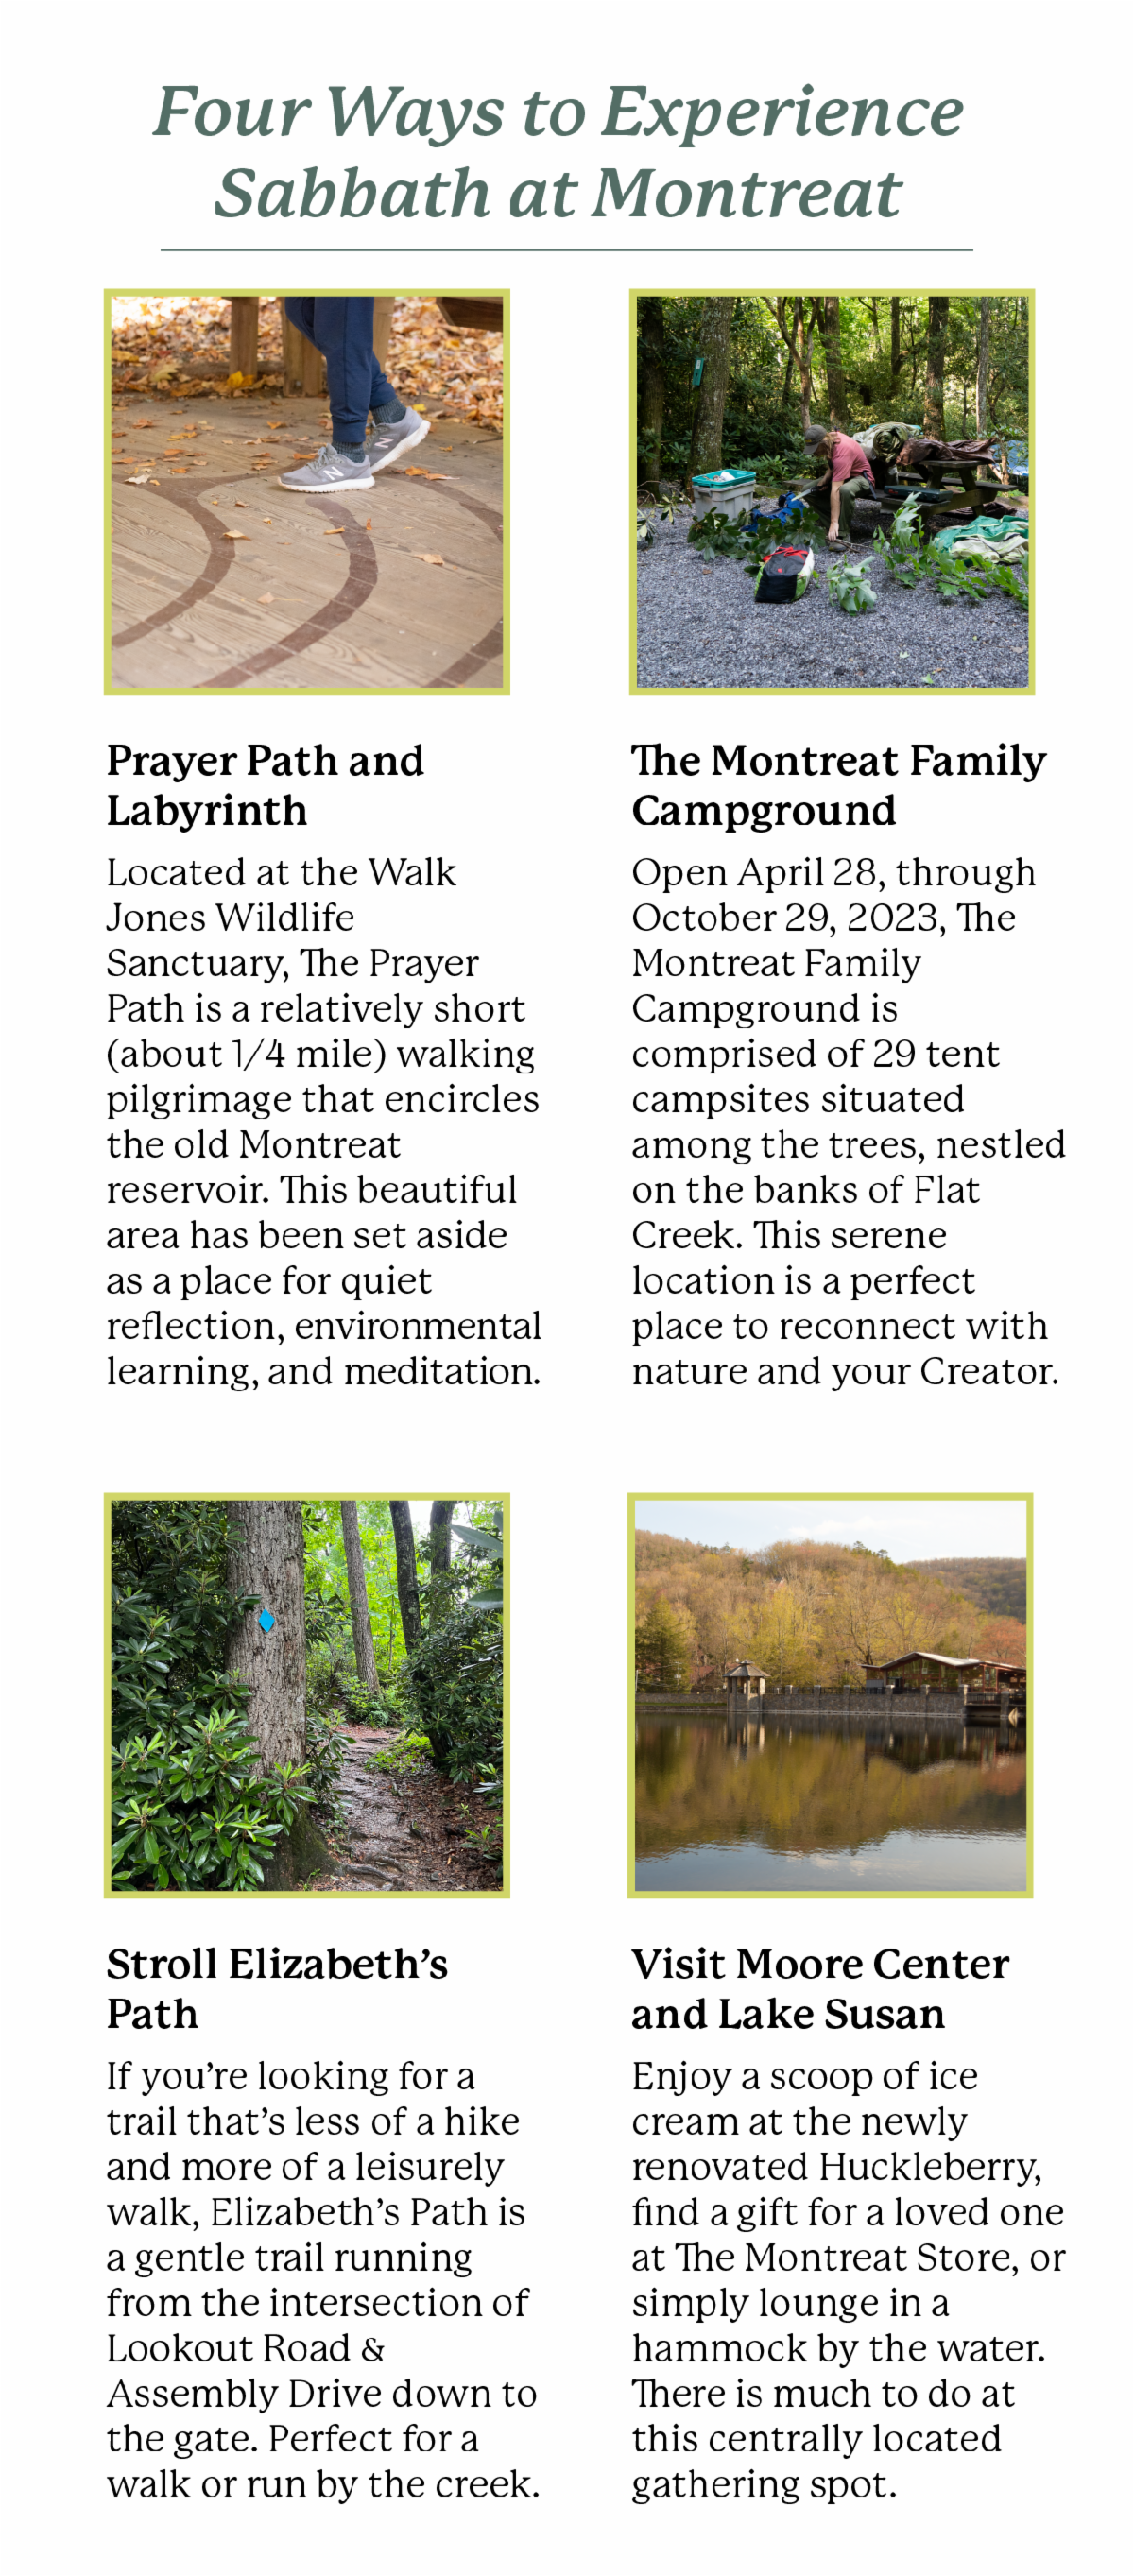 Four ways to experience Sabbath at Montreat - Prayer Path and Labyrinth   Located at the Walk Jones Wildlife Sanctuary, The Prayer Path is a relatively short (about 1/4 mile) walking pilgrimage that encircles the old Montreat reservoir. This beautiful area has been set aside as a place for quiet reflection, environmental learning, and meditation.      The Montreat Family Campground   Open April 28, through October 29, 2023, The Montreat Family Campground is comprised of 29 tent campsites situated among the trees, nestled on the banks of Flat Creek. This serene location is a perfect place to reconnect with nature and your creator.      Stroll Elizabeth’s Path   If you’re looking for a trail that’s less of a hike and more of a leisurely walk, Elizabeth’s Path is a gentle trail running from the intersection of Lookout Road & Assembly Drive down to the gate. Perfect for a walk or run by the creek.      Visit Moore Center and Lake Susan   Enjoy a scoop of ice cream at the newly renovated Huckleberry, find a gift for a loved one at The Montreat Store, or simply lounge in a hammock by the water. There is much to do at this centrally located gathering spot. 